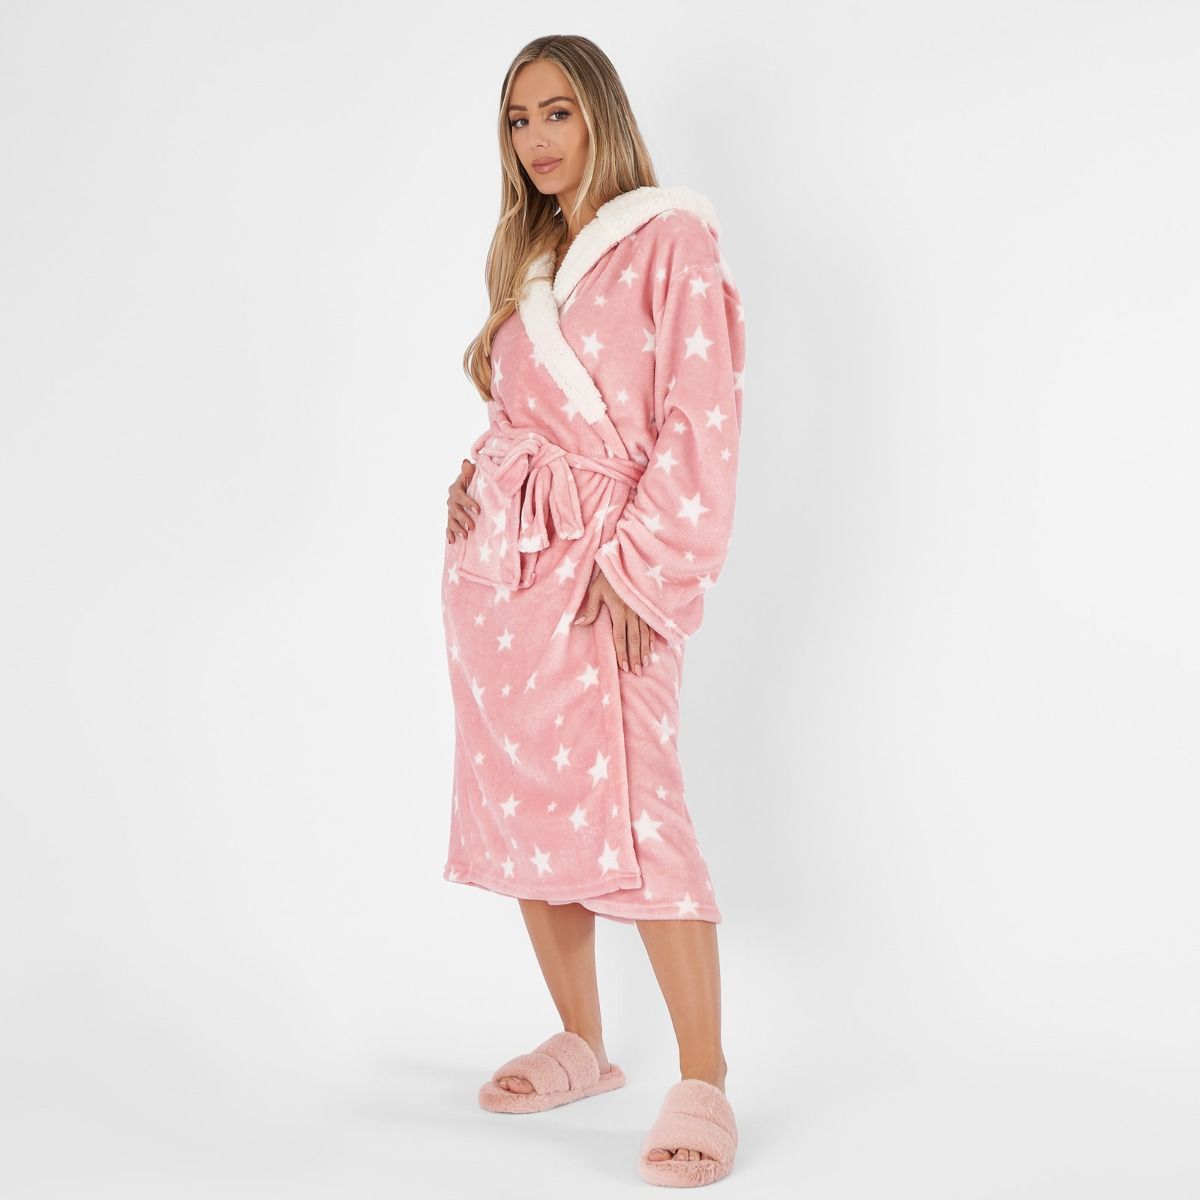 Star Print Hooded Sherpa Dressing Gown